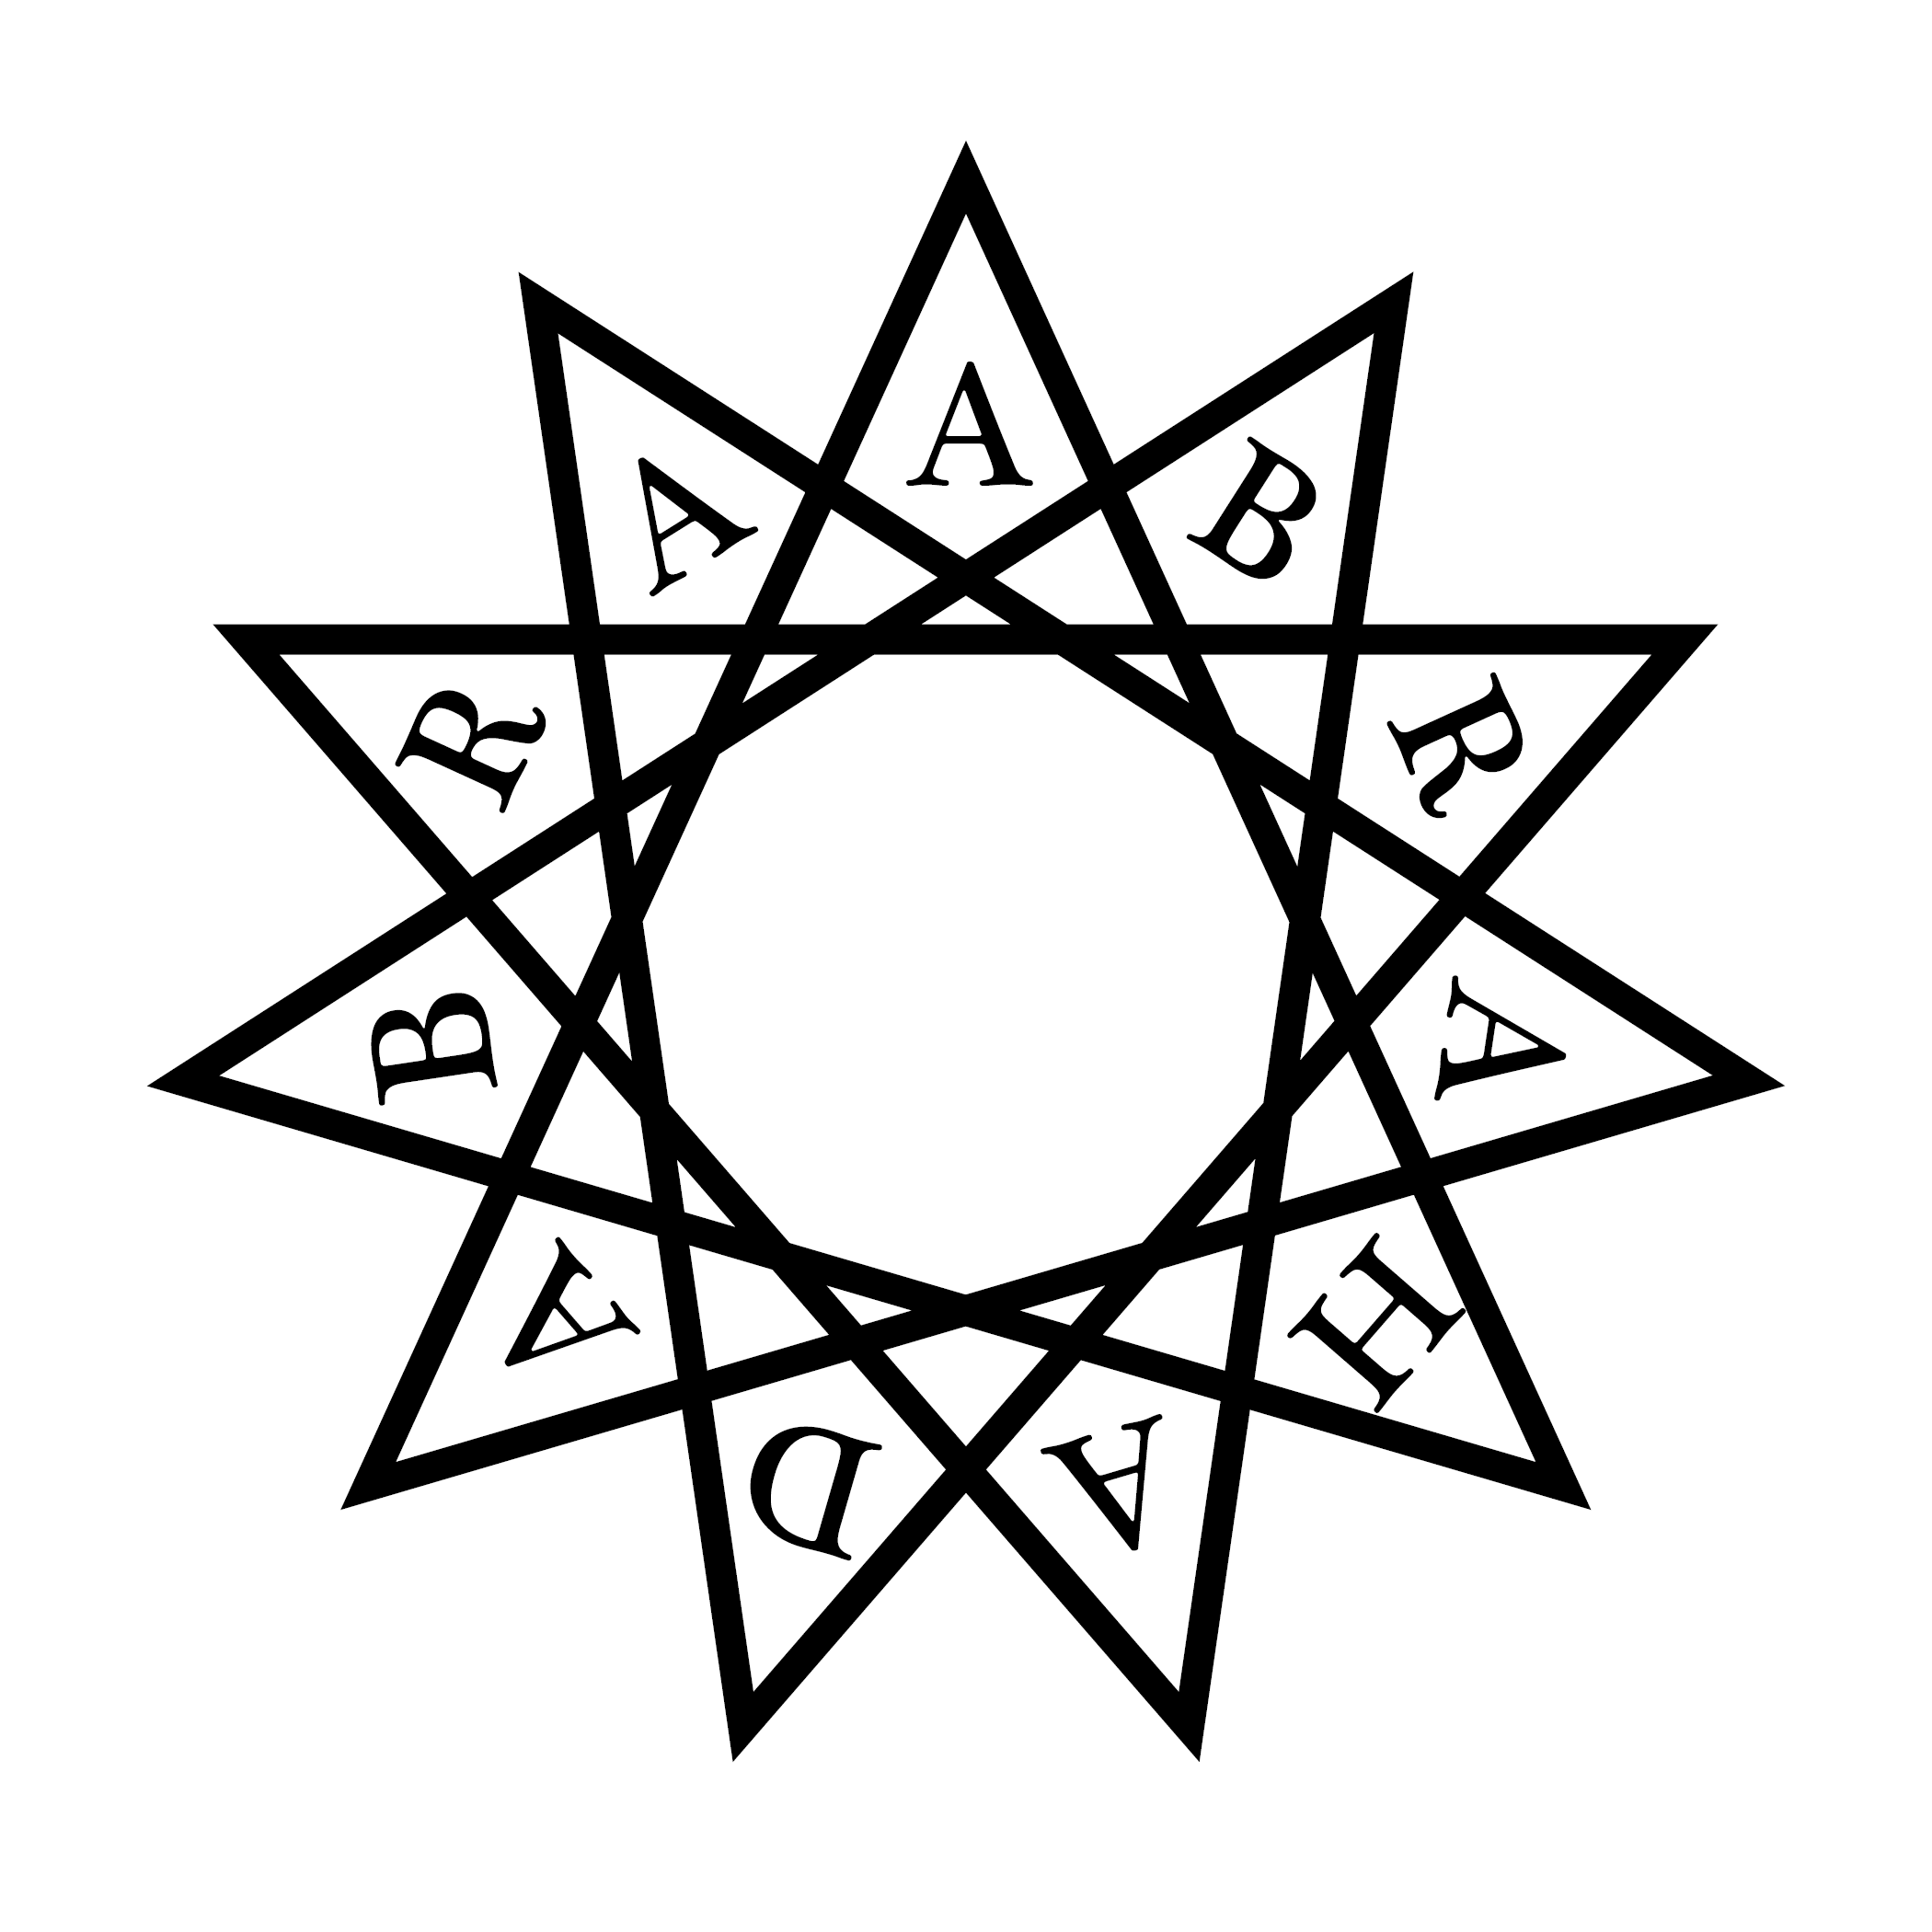 The letters of ABRAHADABRA arranged within an eleven-pointed star.